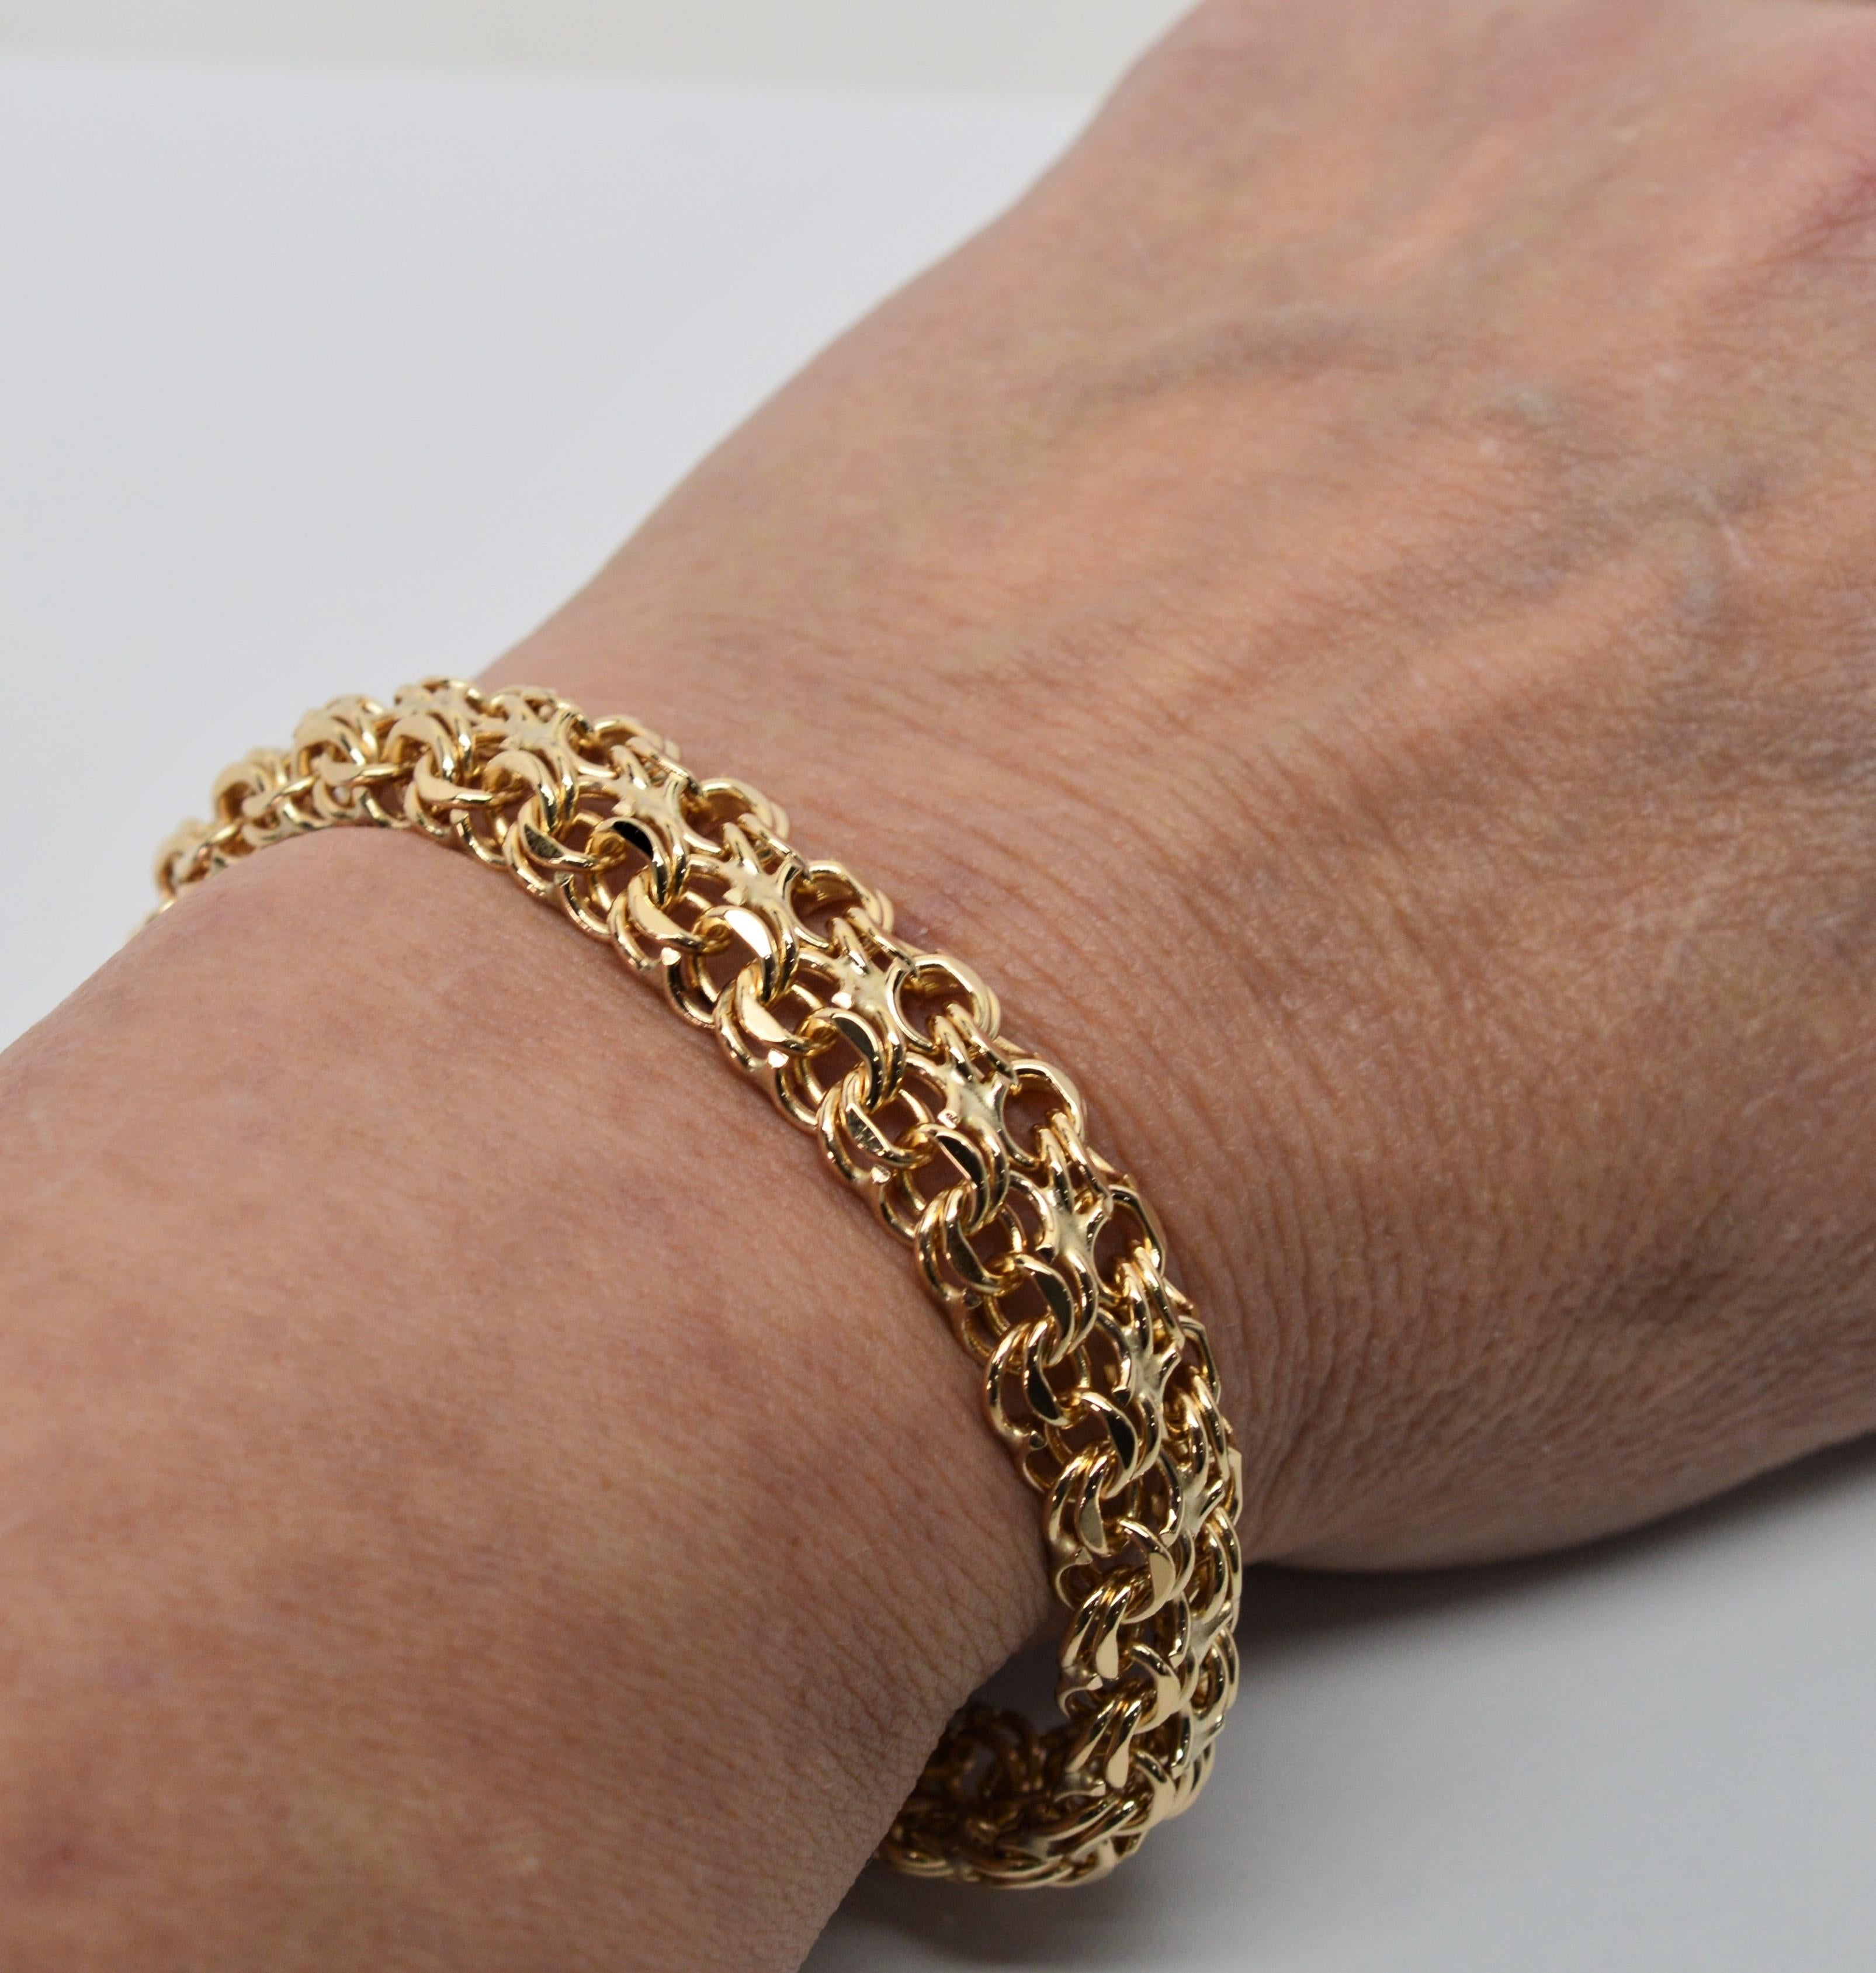 Woven Double Link 14 Karat Yellow Gold Rope Chain Bracelet In Excellent Condition For Sale In Mount Kisco, NY